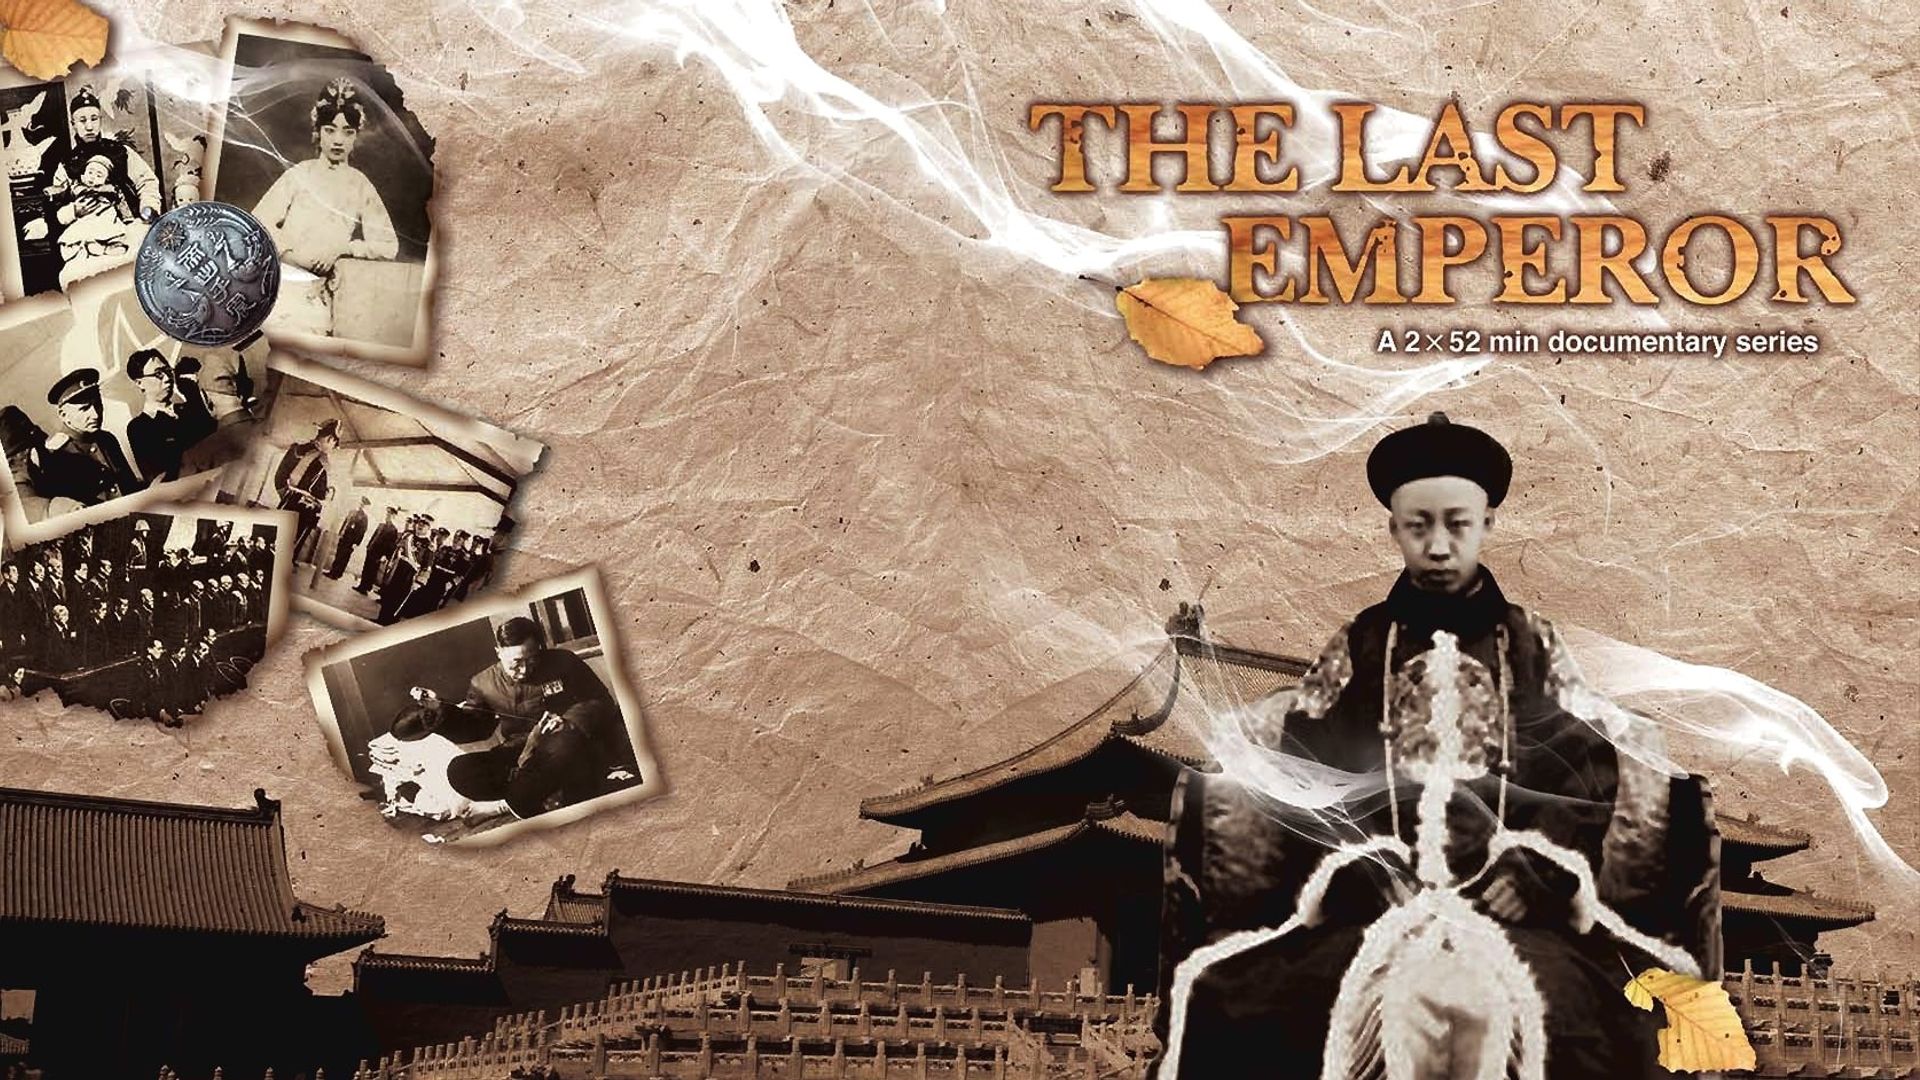 Pu Yi, the Last Emperor background